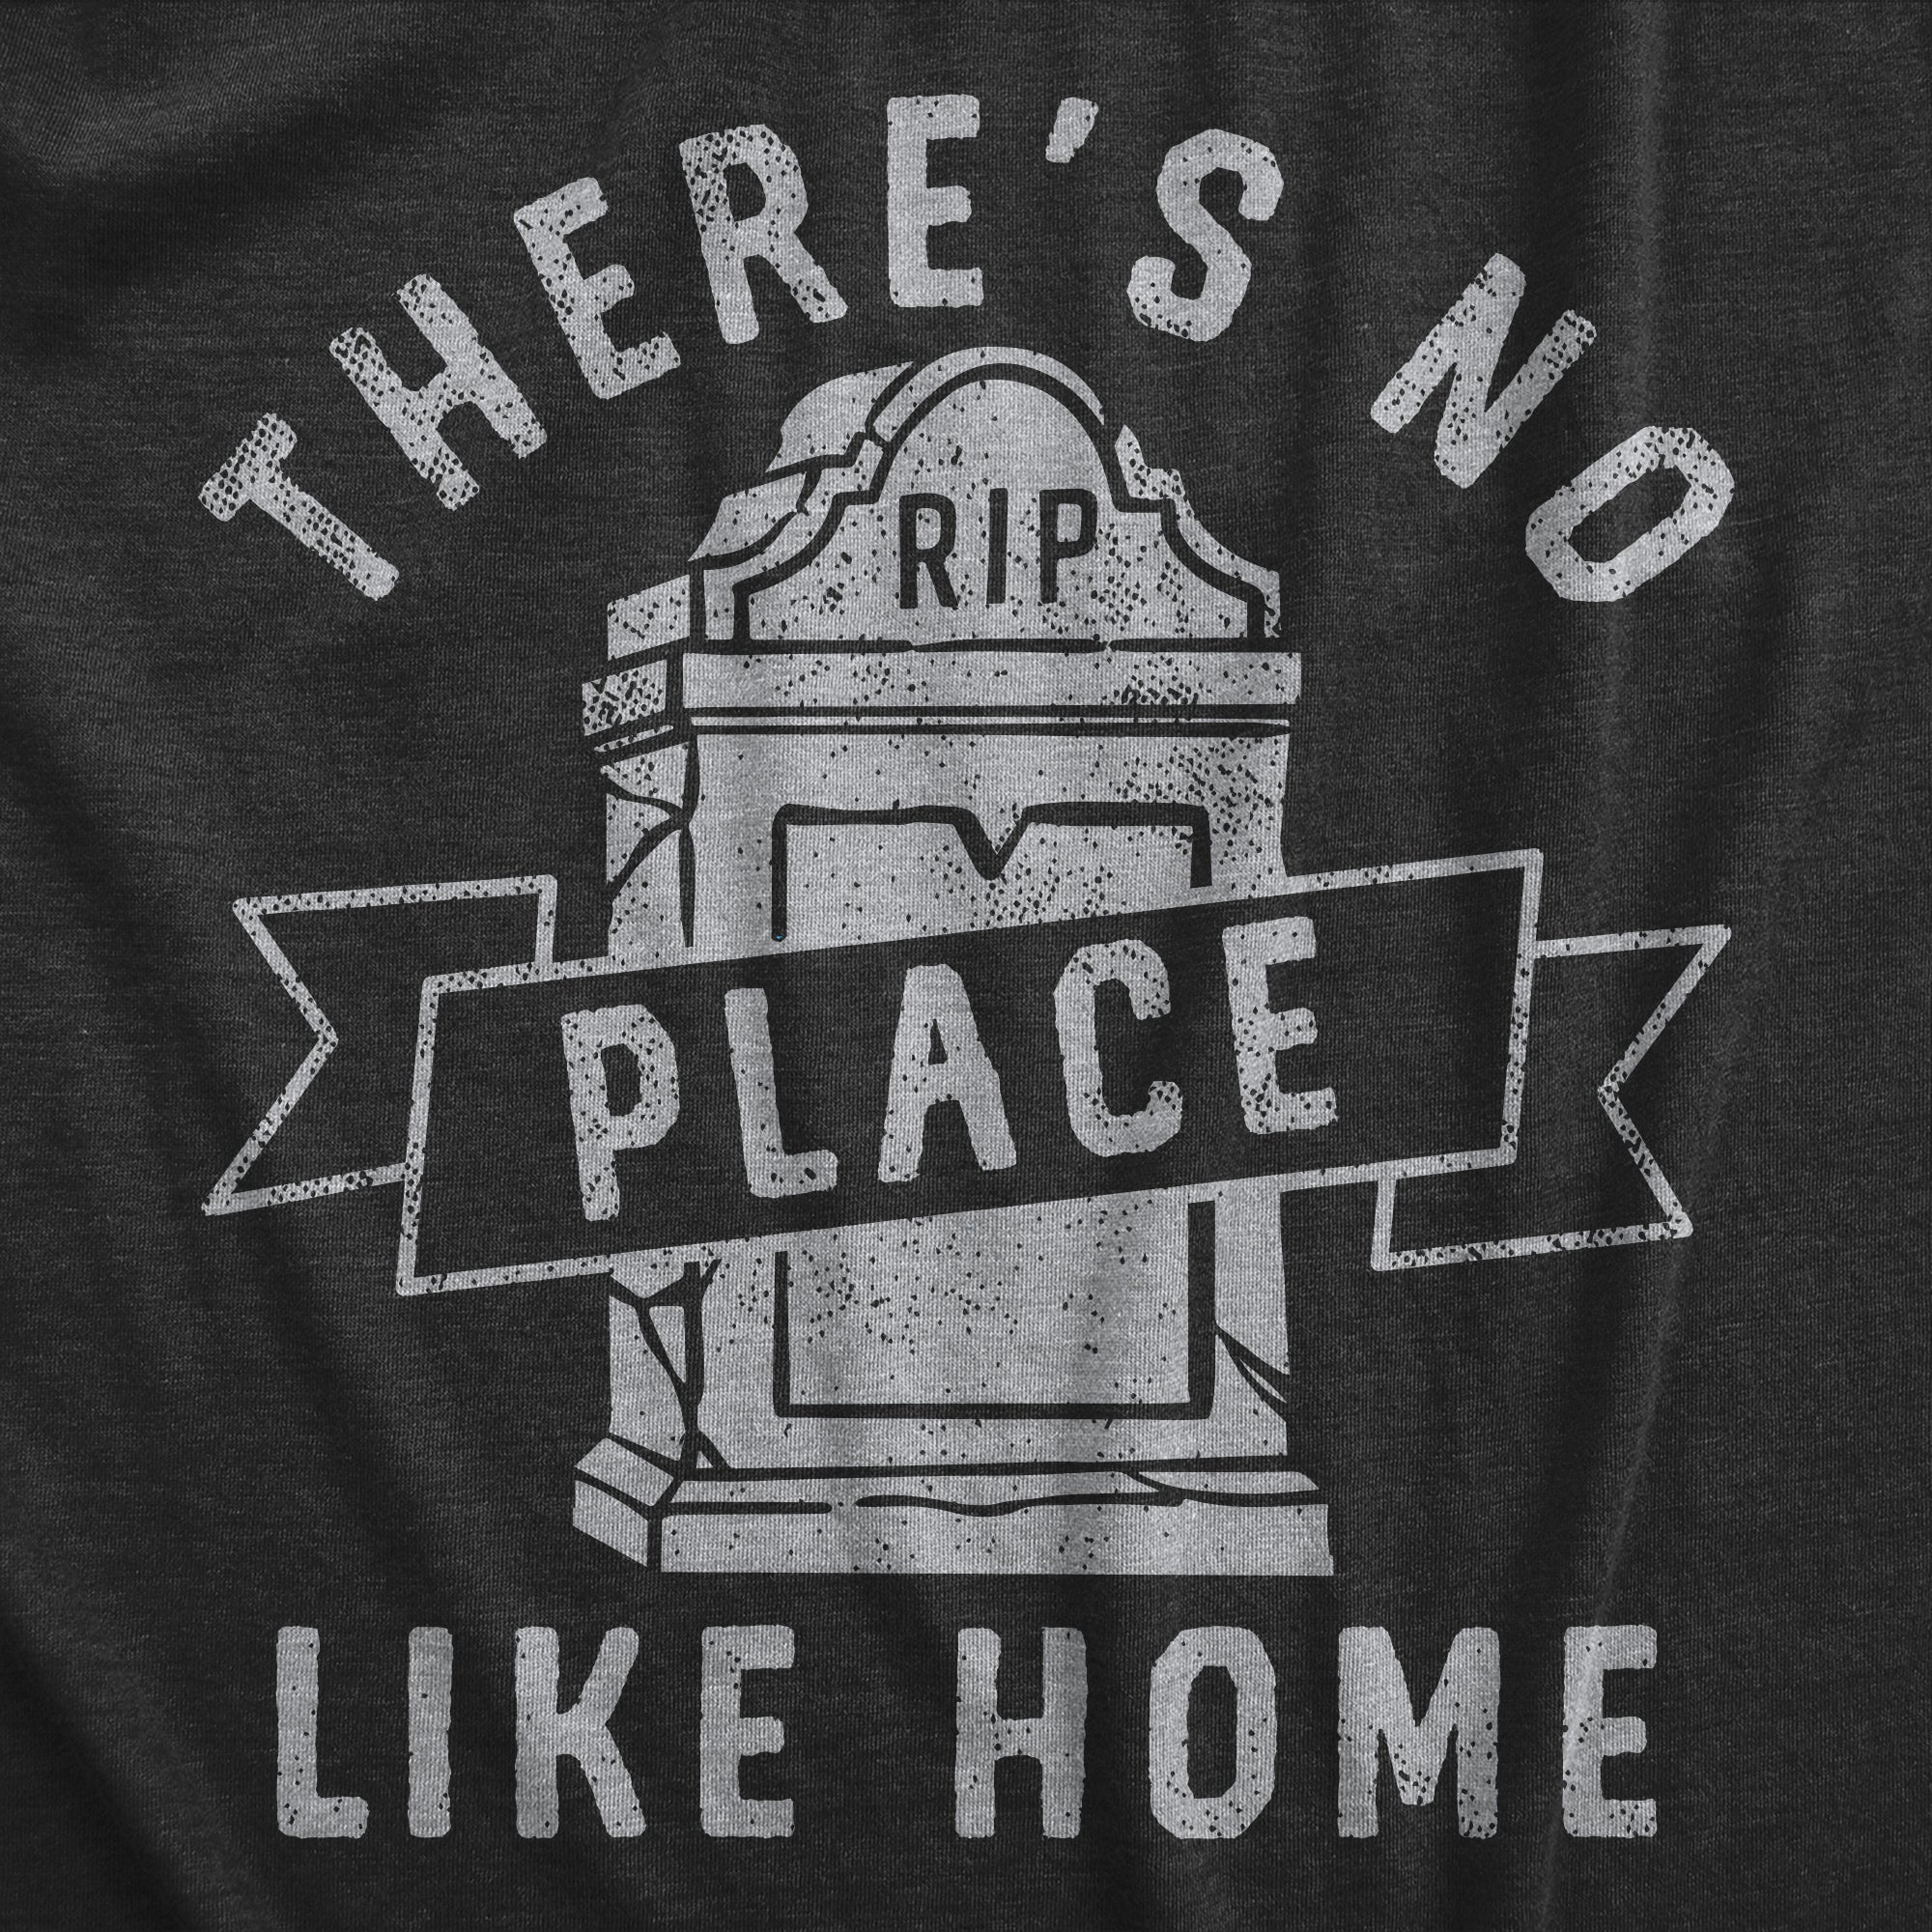 Funny Heather Black - HOME Theres No Place Like Home Womens T Shirt Nerdy Halloween Sarcastic Tee